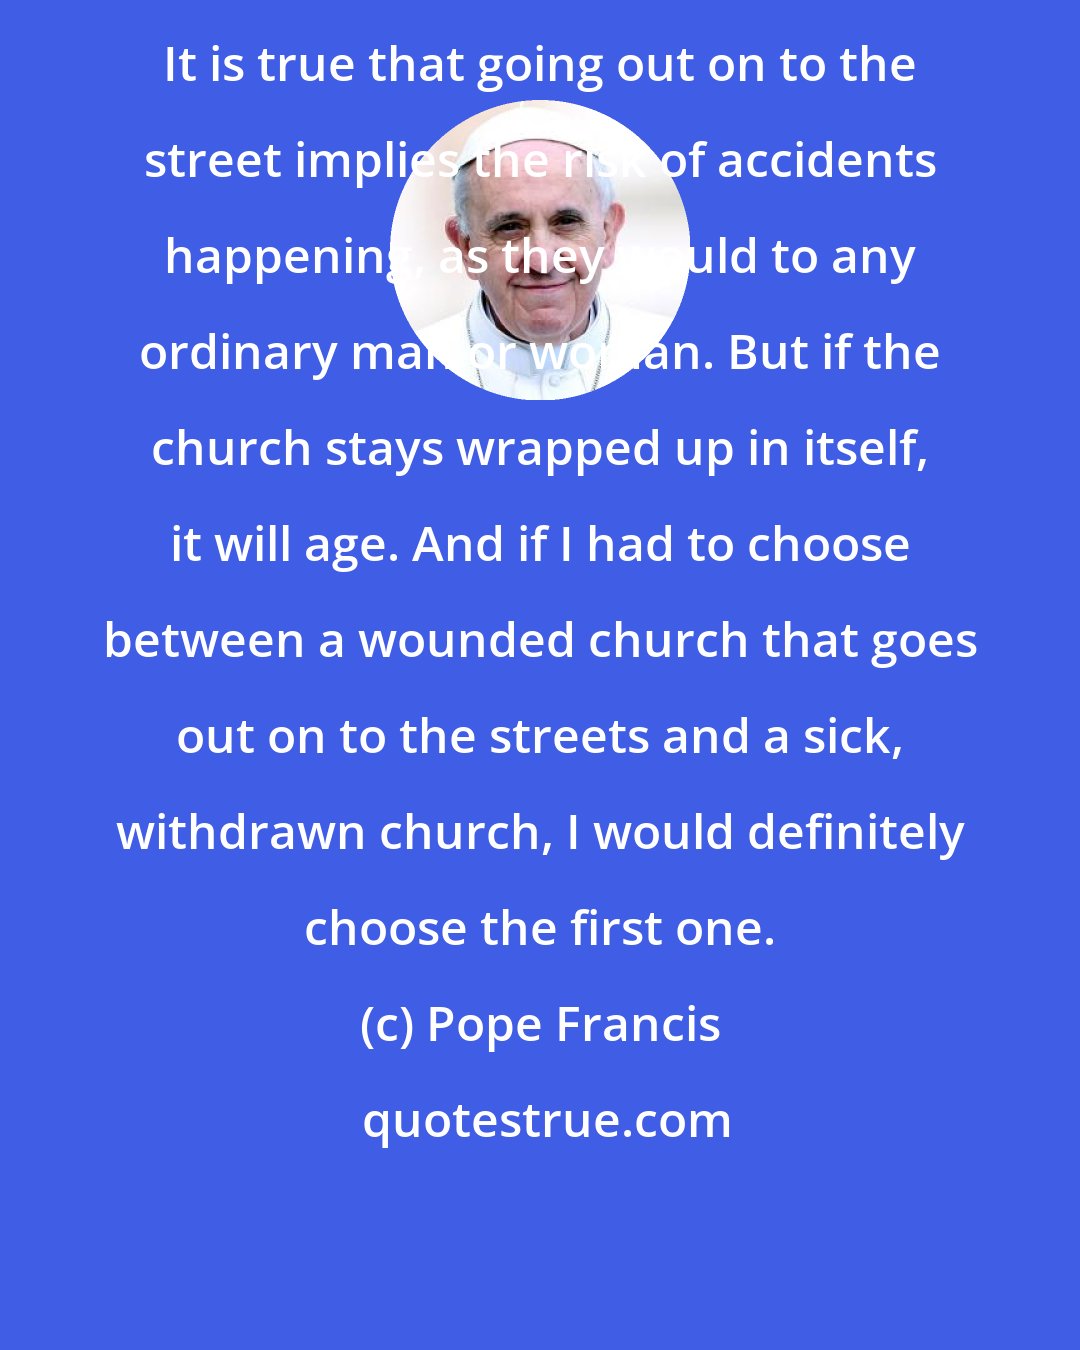 Pope Francis: It is true that going out on to the street implies the risk of accidents happening, as they would to any ordinary man or woman. But if the church stays wrapped up in itself, it will age. And if I had to choose between a wounded church that goes out on to the streets and a sick, withdrawn church, I would definitely choose the first one.